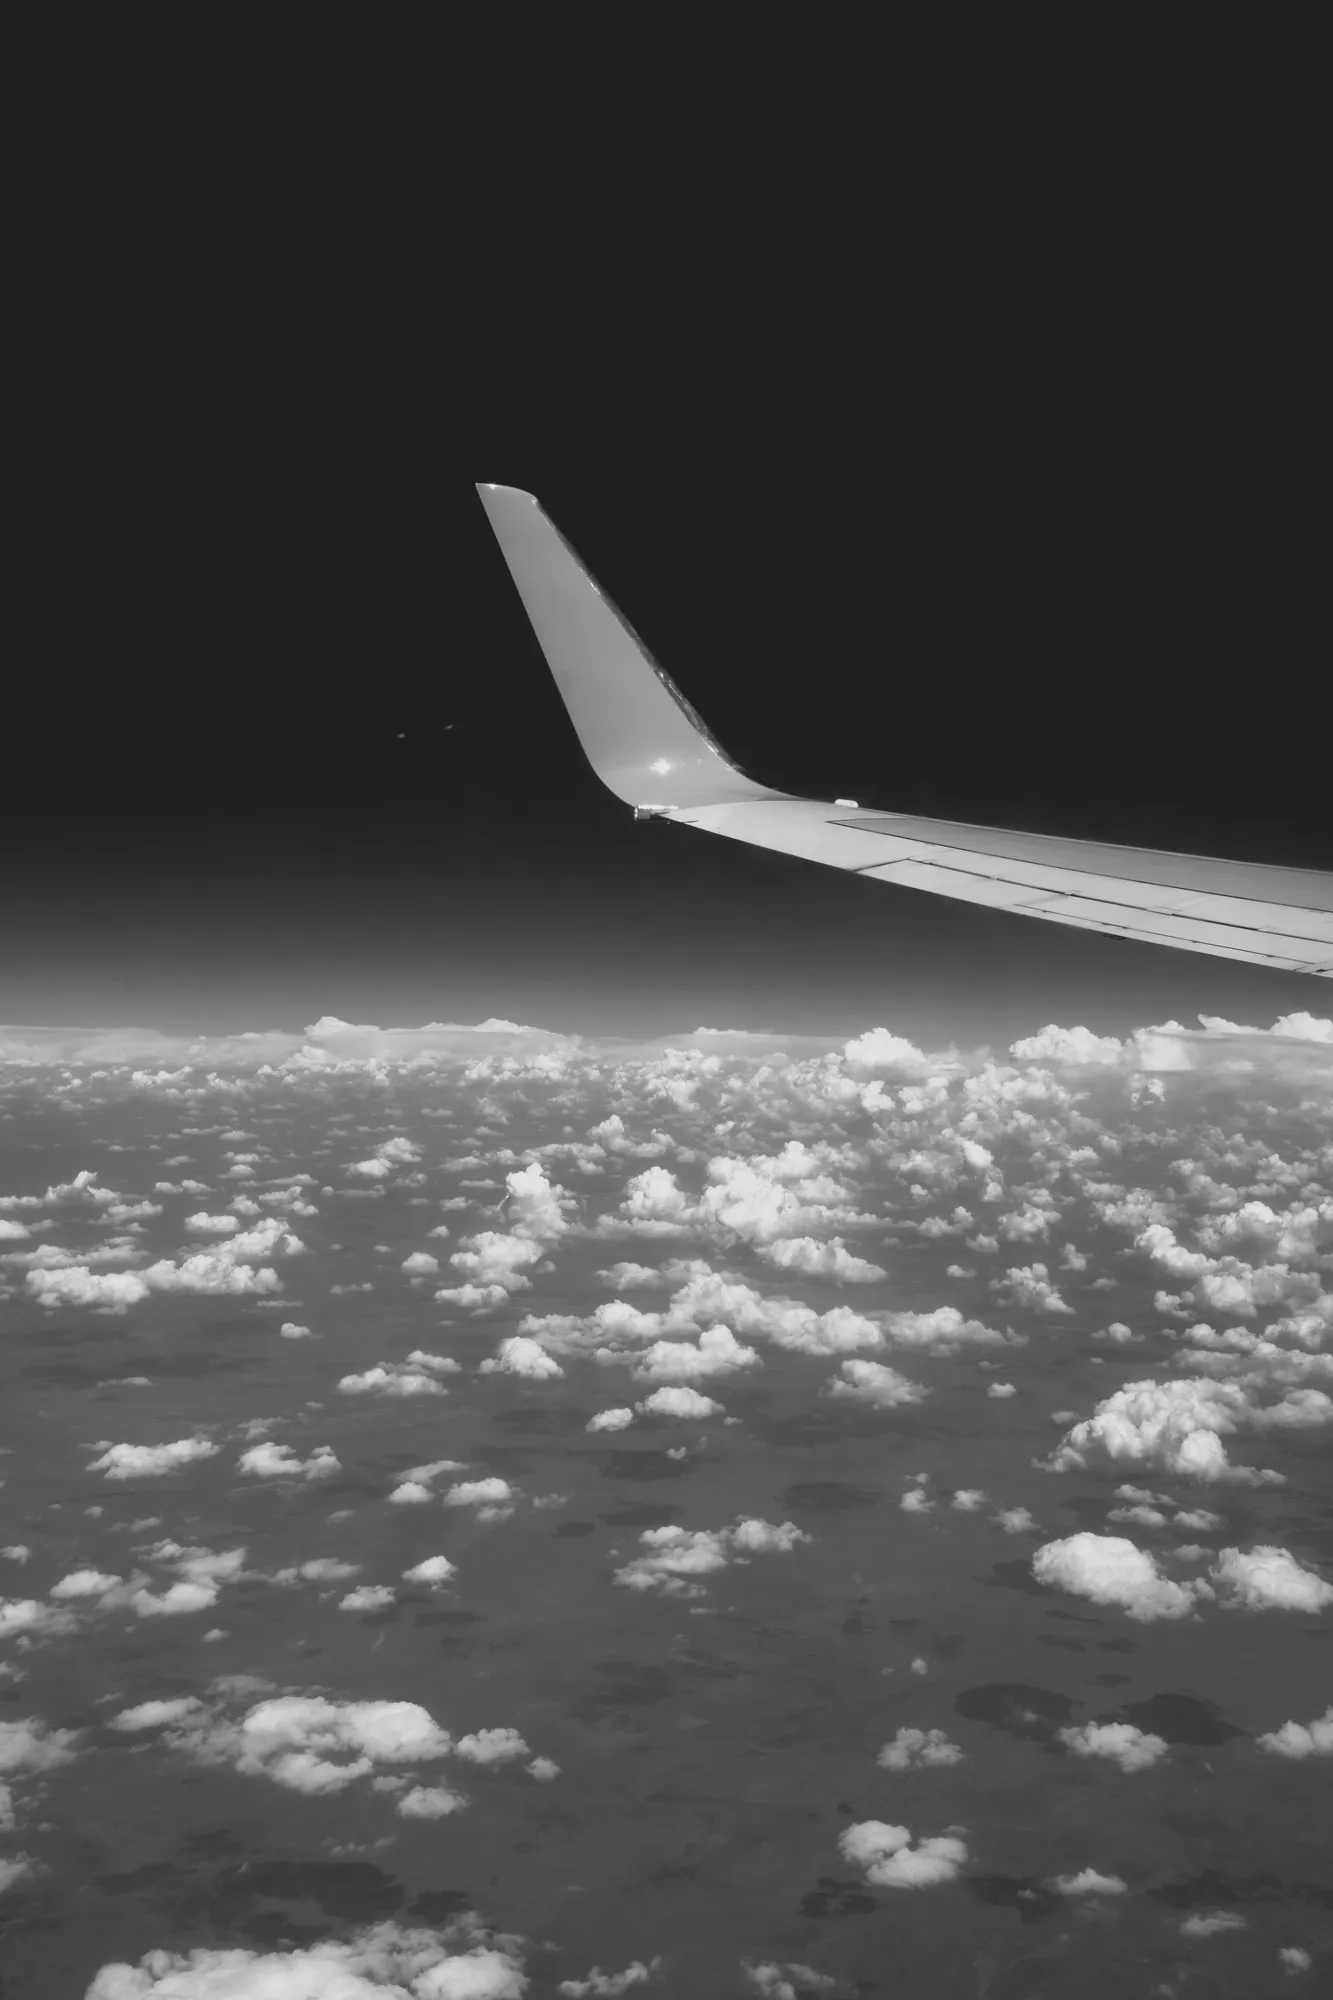 2022-02-12 - Cape Town - Clouds beneath airplane wing